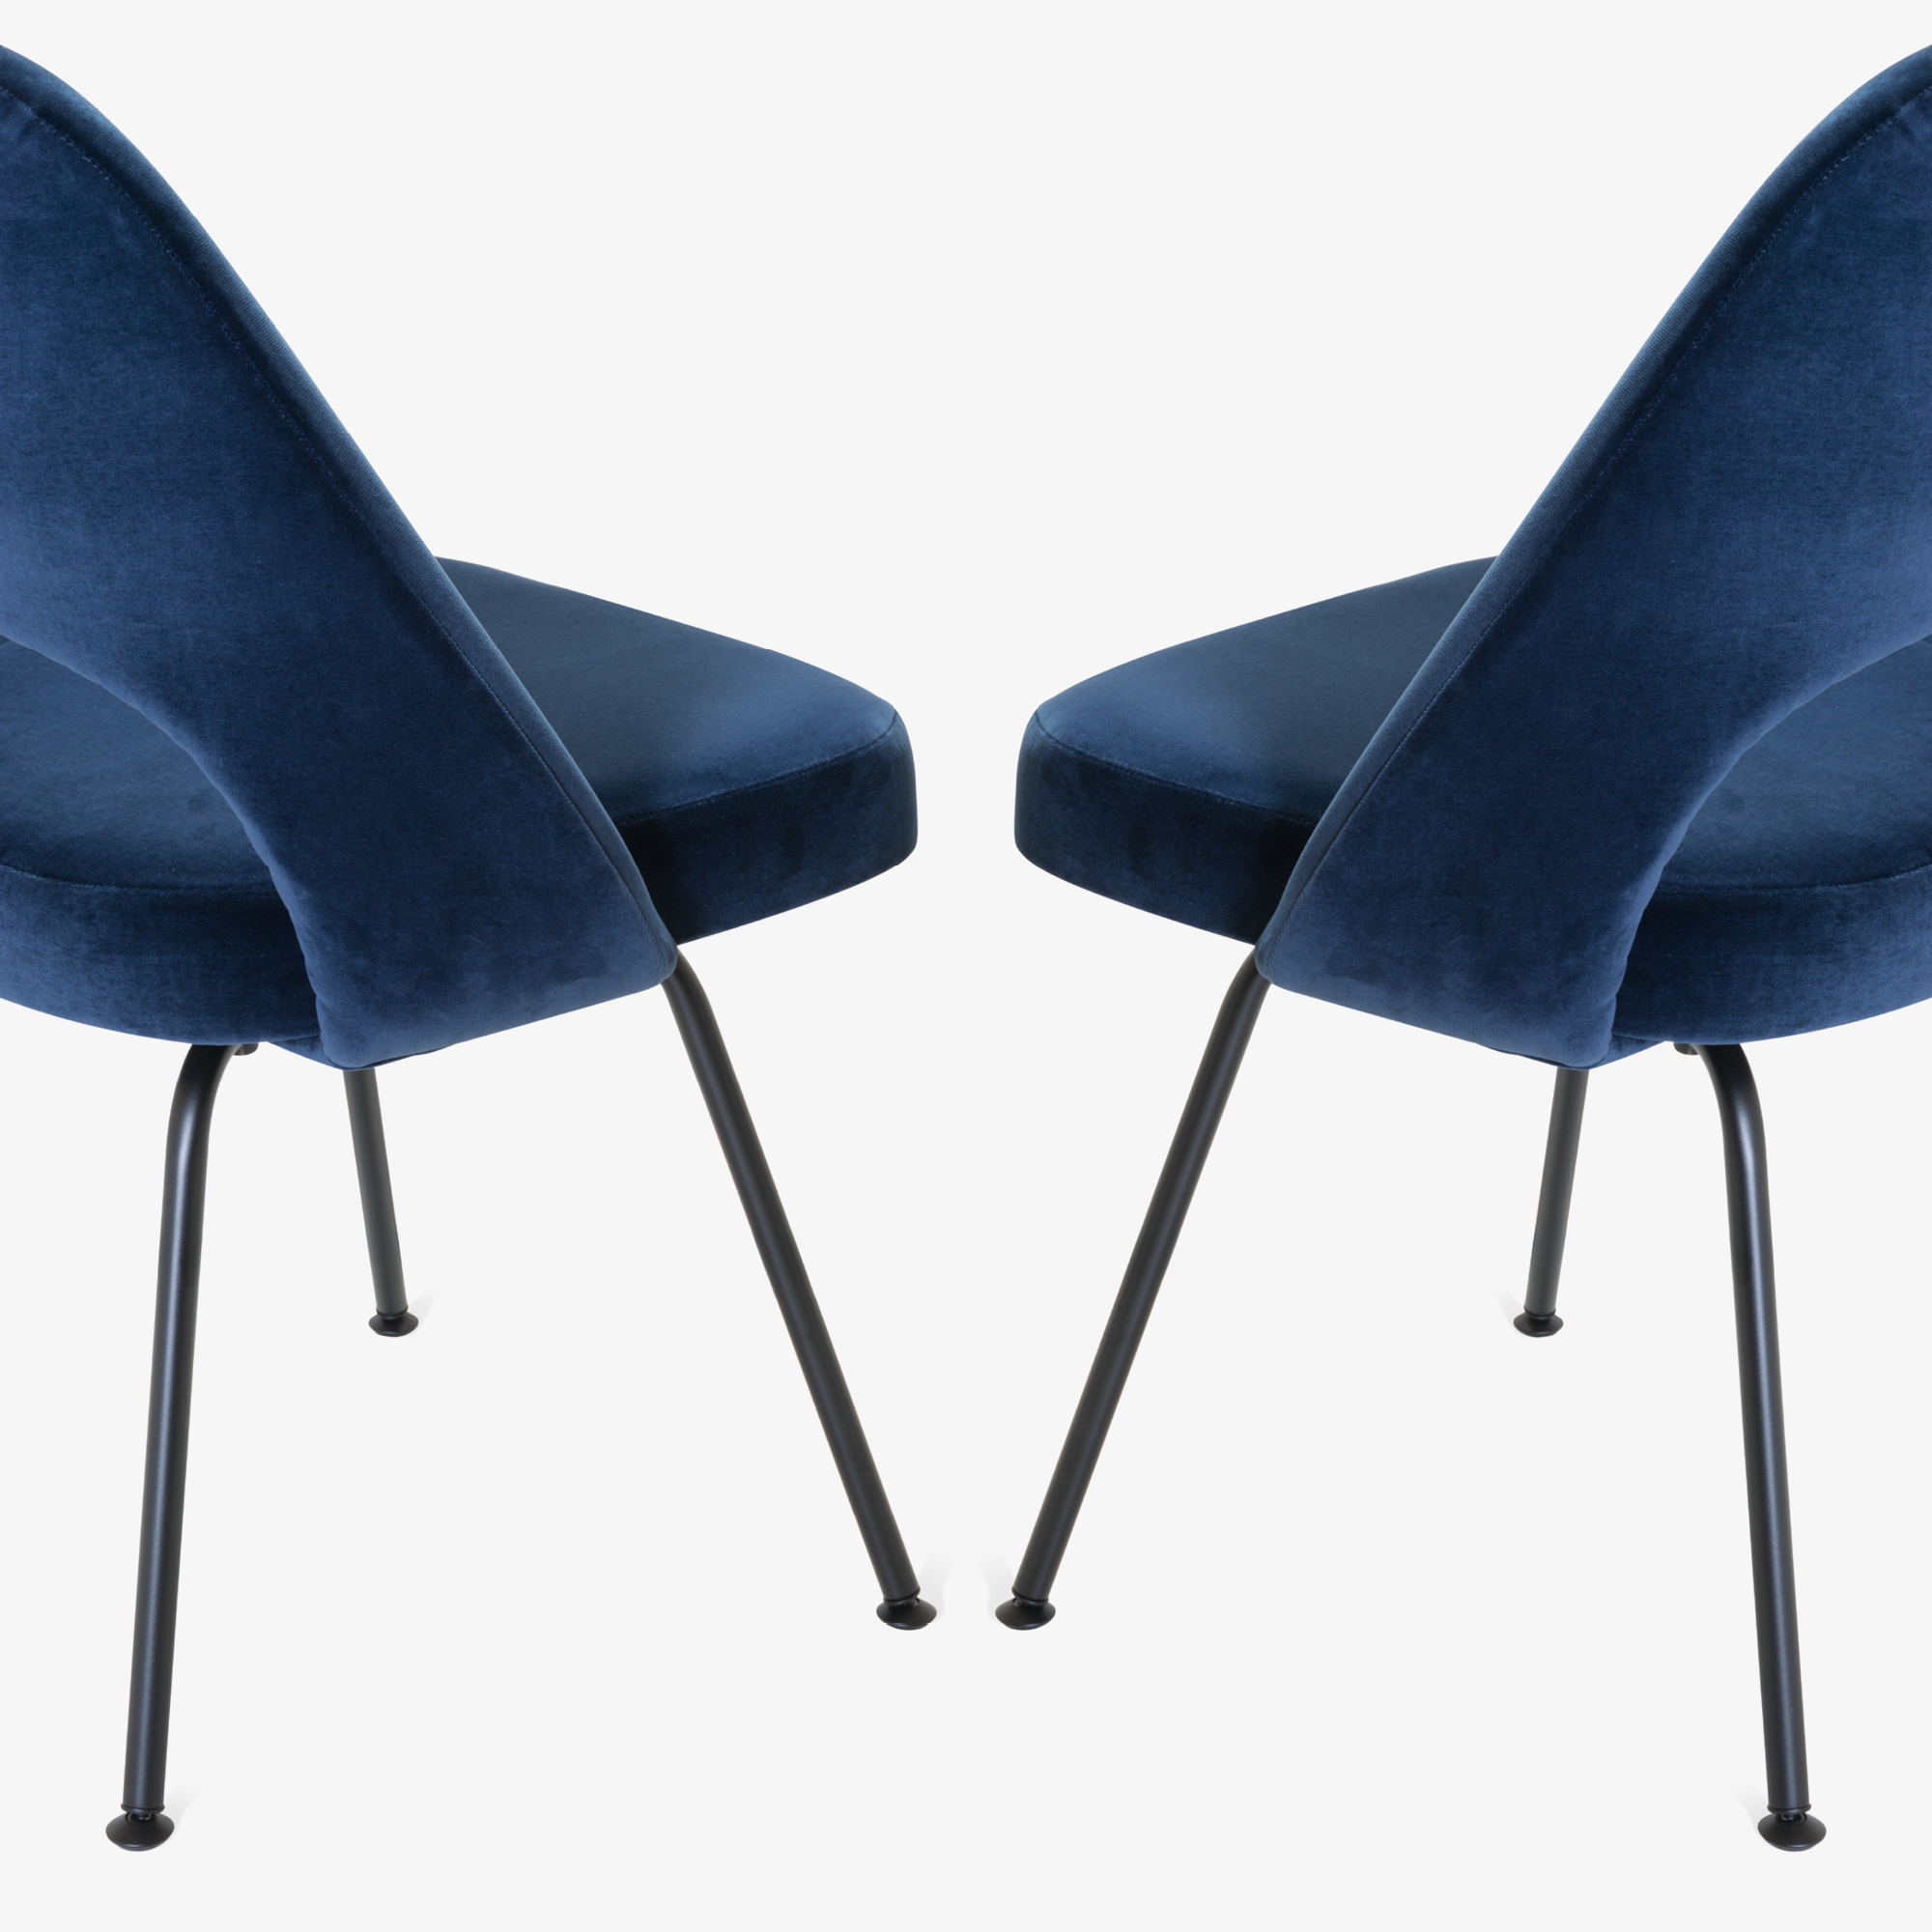 Saarinen Executive Armless Chairs in Navy Velvet, Black Edition9.png